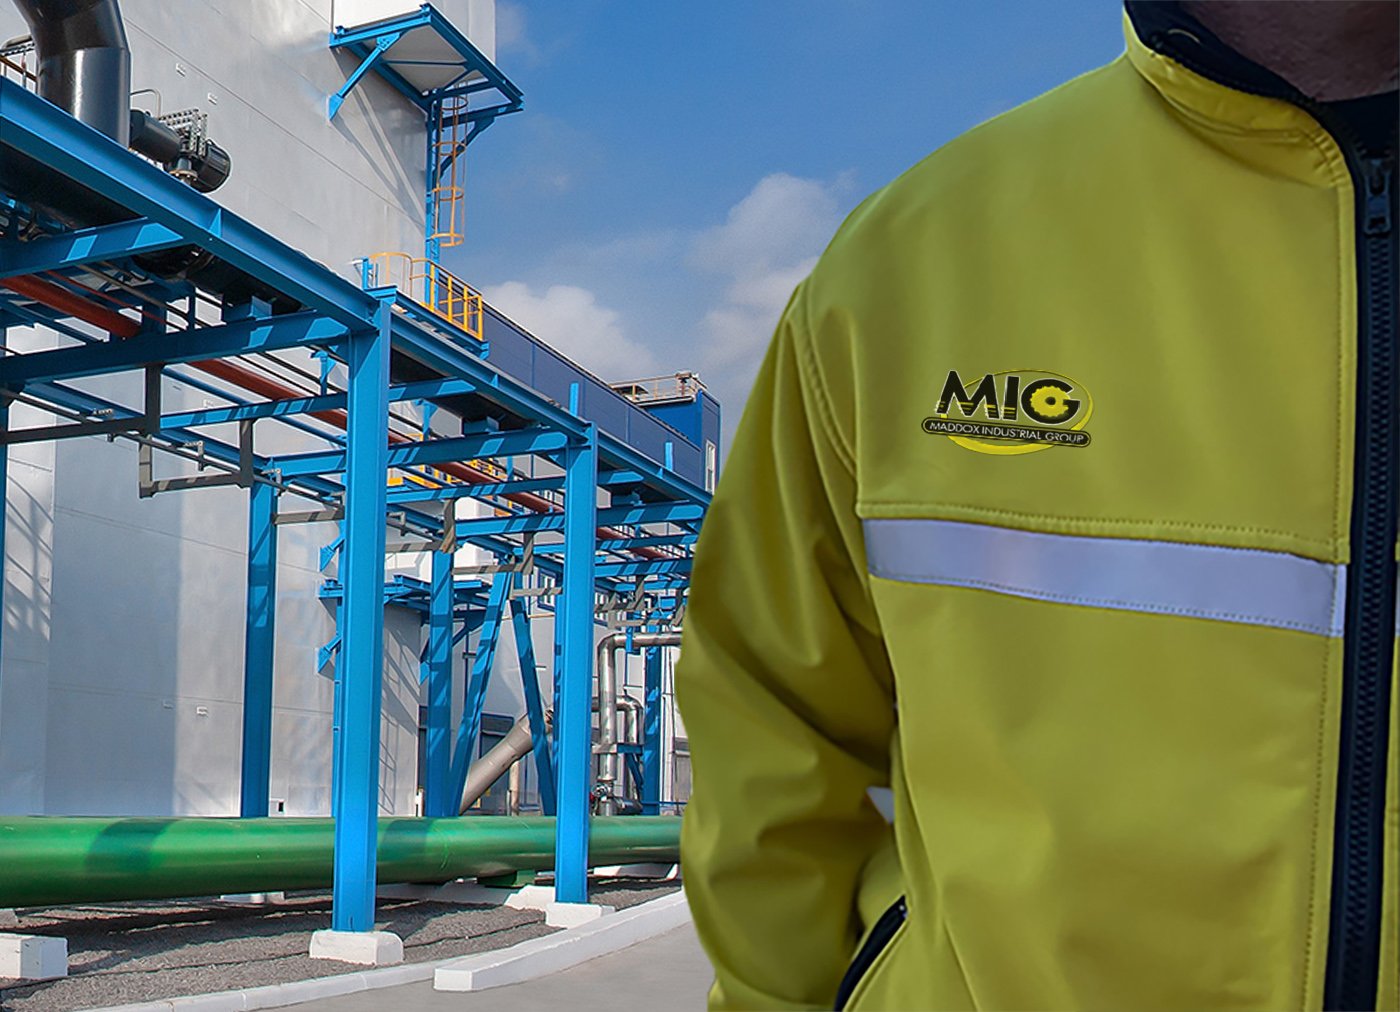 MIG - Maddox Industrial Group - Contact Us for Industrial Services 4